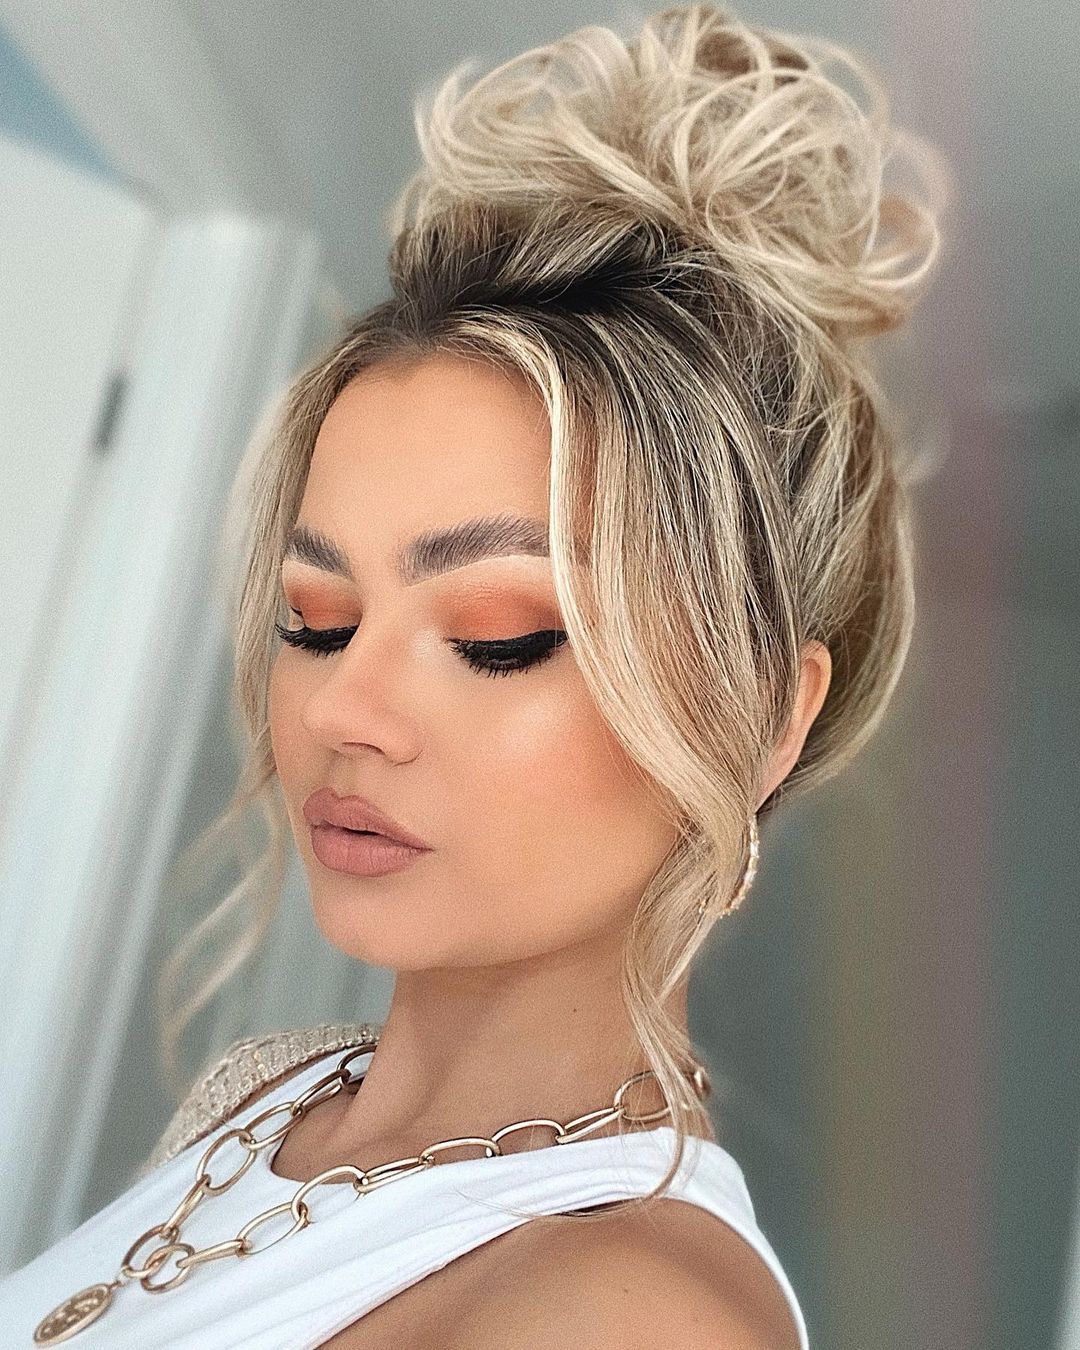 24 Messy Bun Hair Ideas That You Need To Try Out